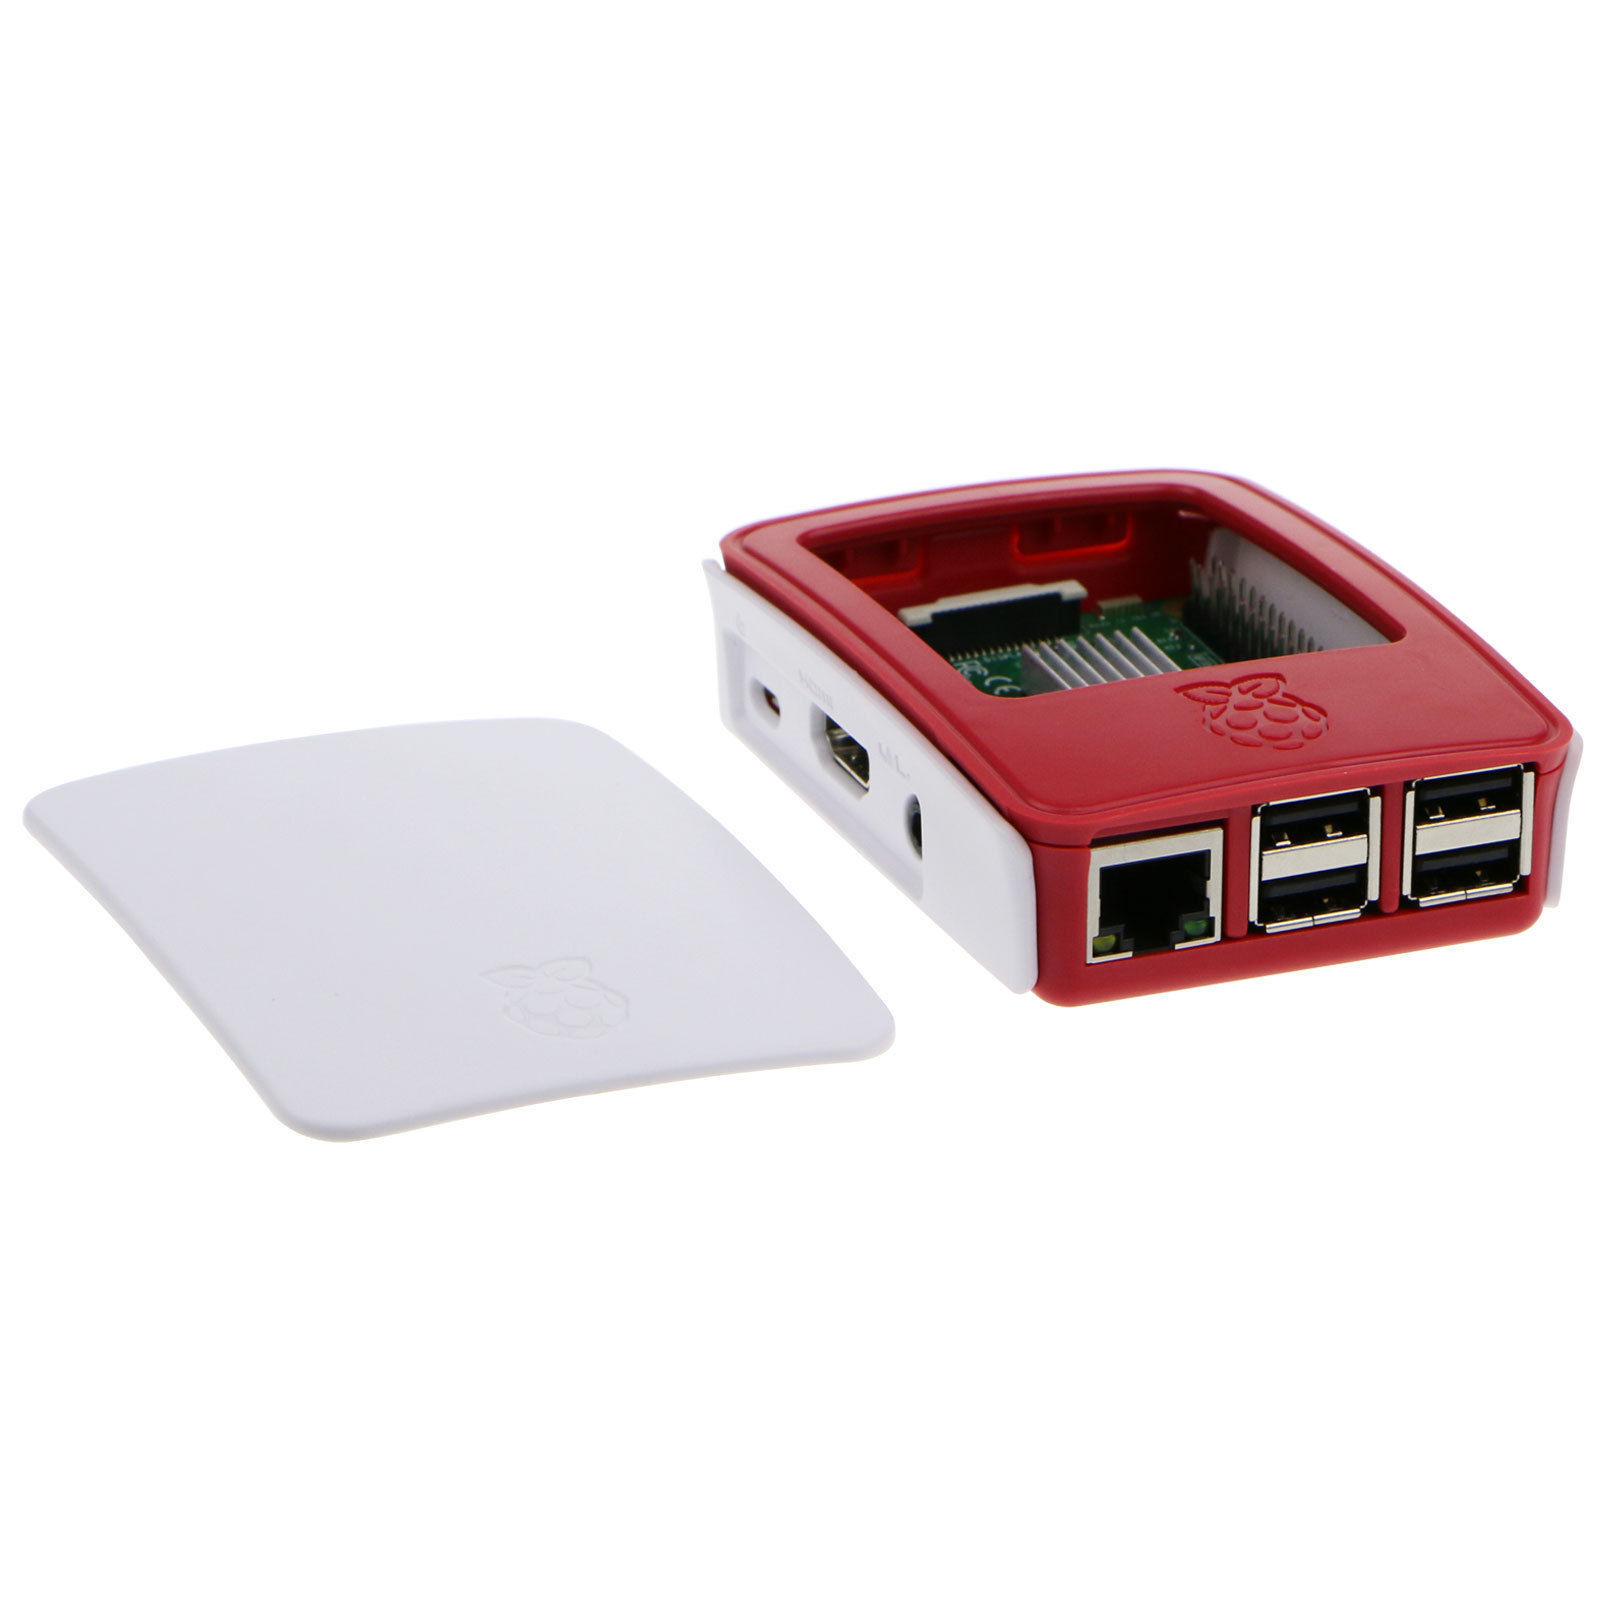 Raspberry Pi 3 Model B case, OFFICIAL WHITE & RED ***FREE SHIPPING*** USA****